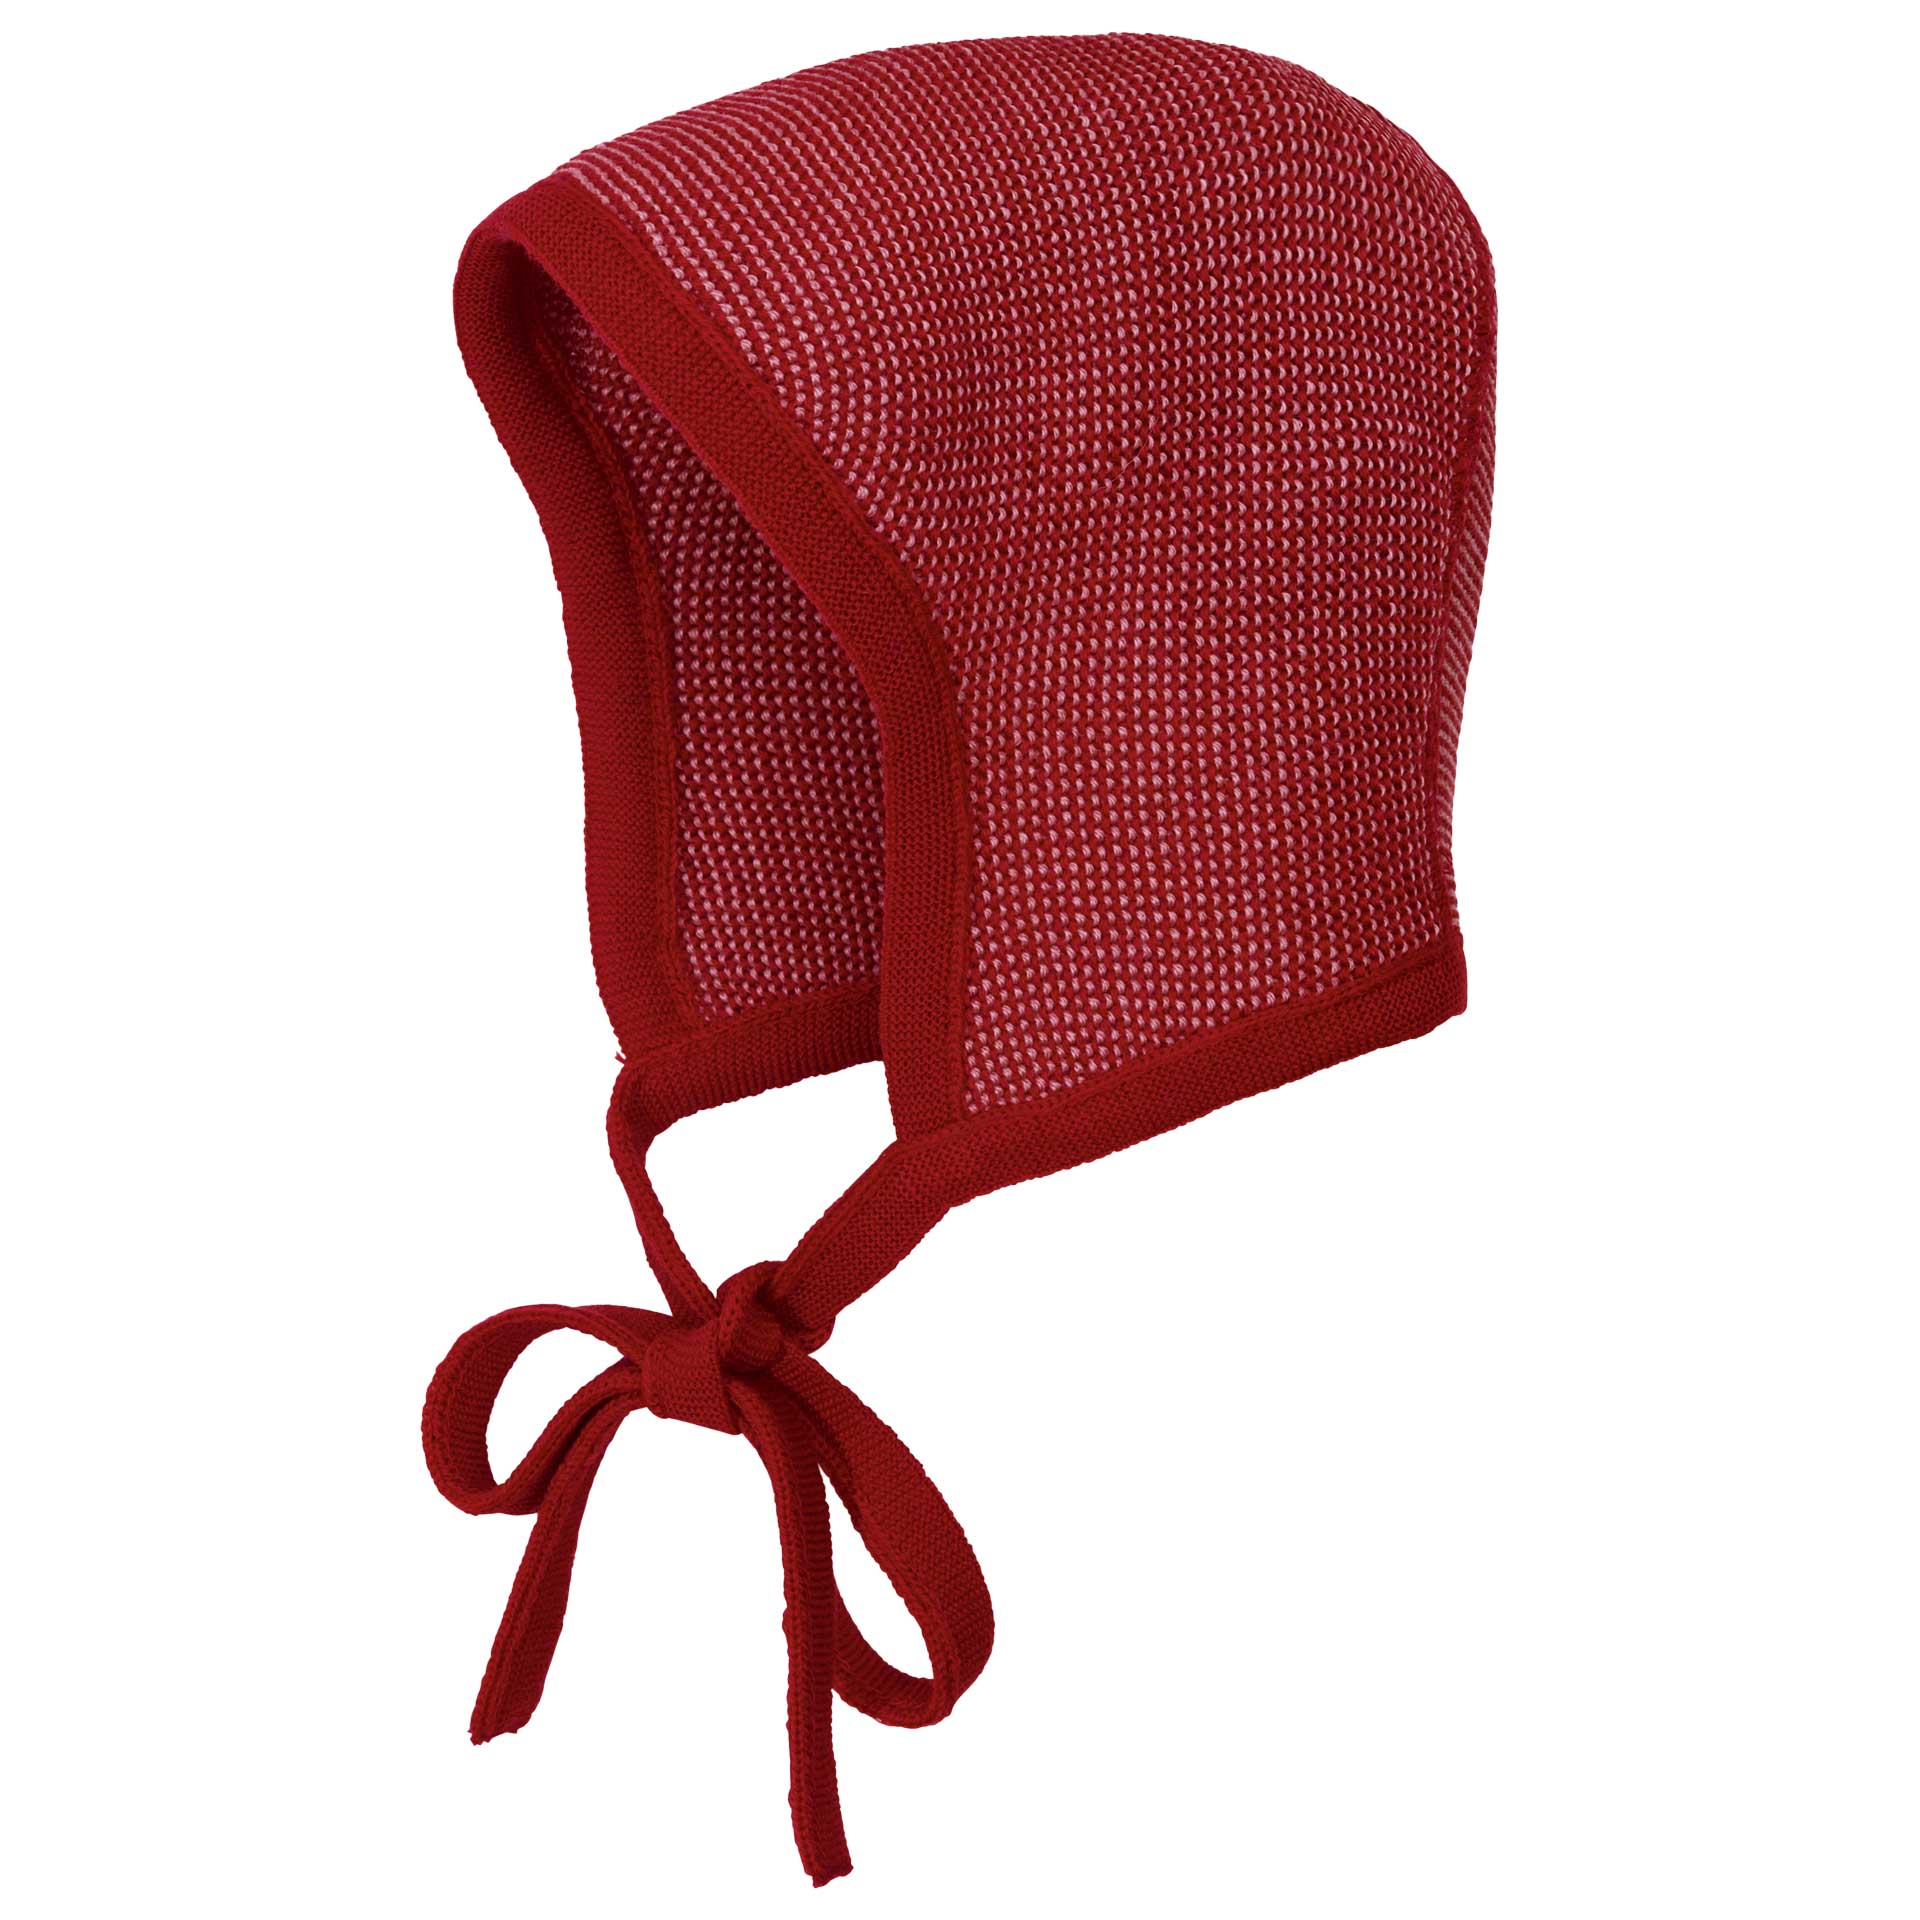 Knitted Bonnet *discontinued colour,Knitted Bonnet - discontinued colour